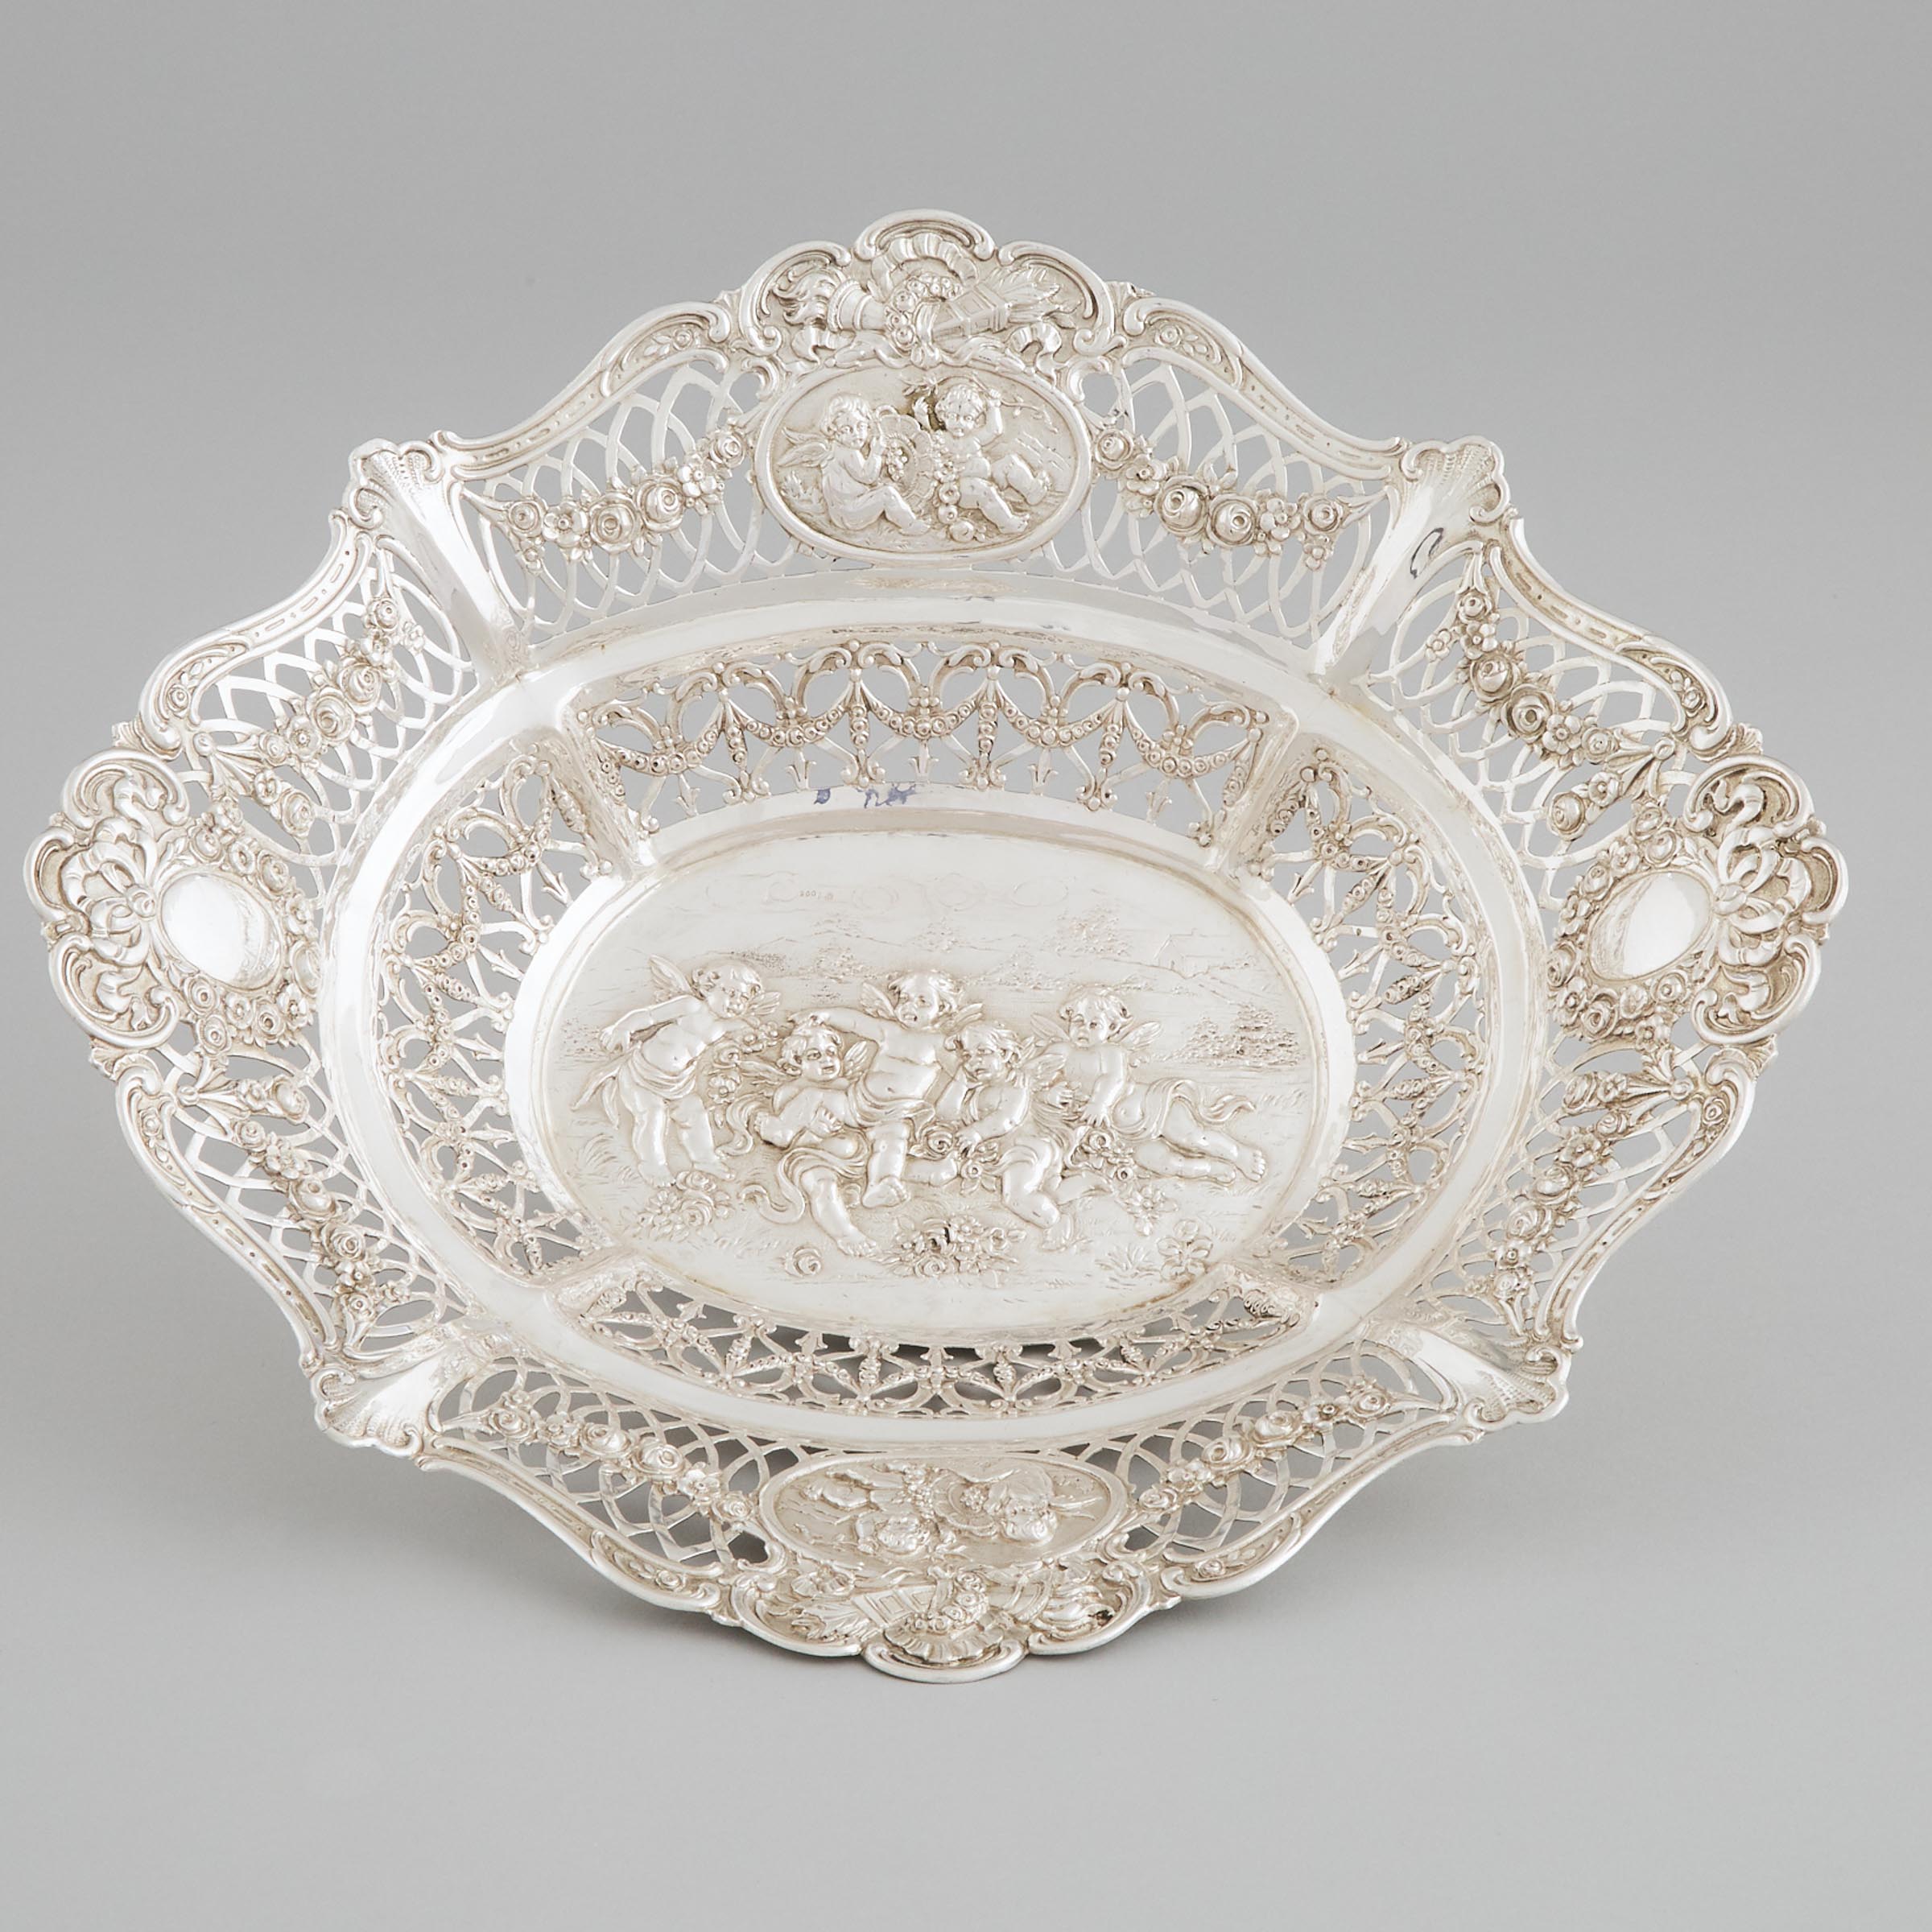 German Silver Shaped Oval Basket, early 20th century